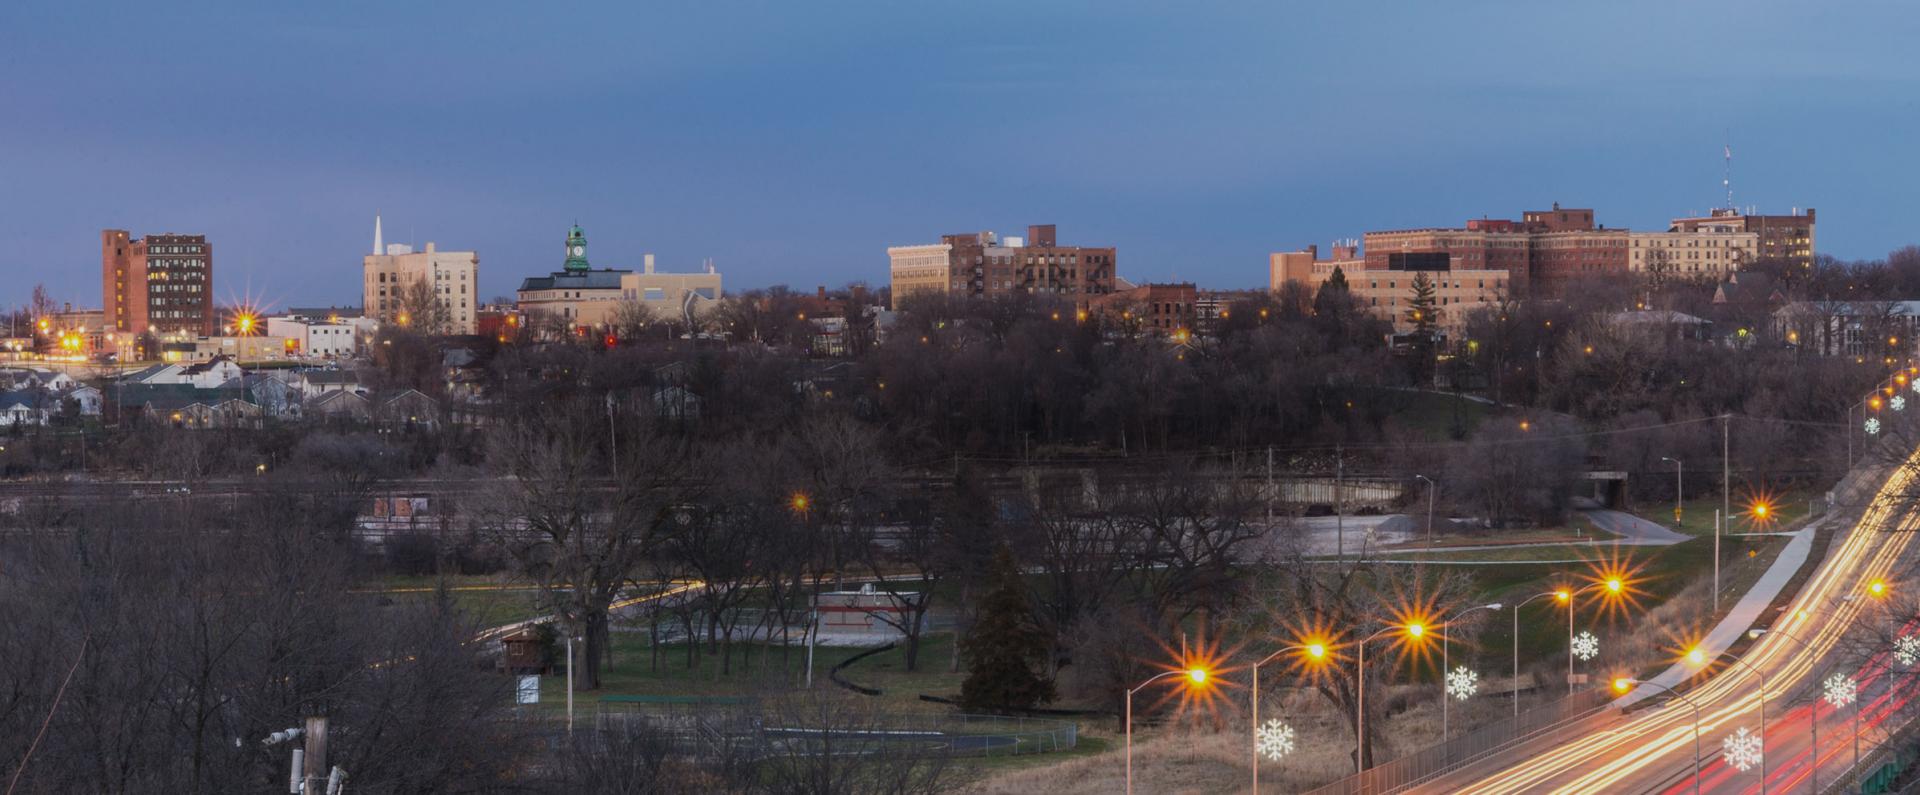 Skyline view of Fort Dodge